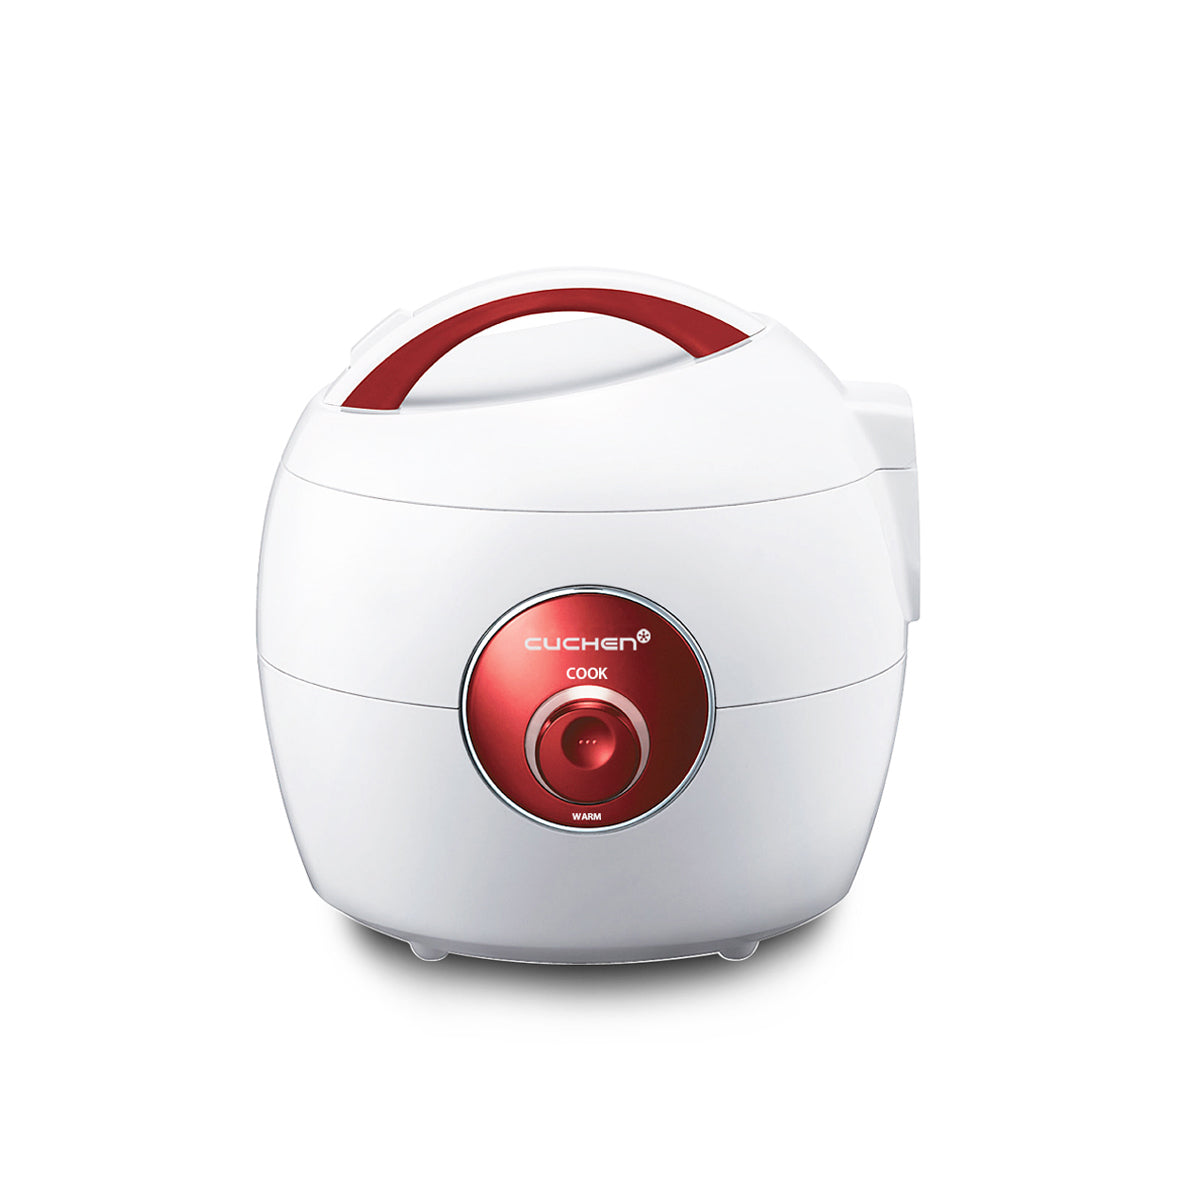 Rice Cooker Size: 4 Cup